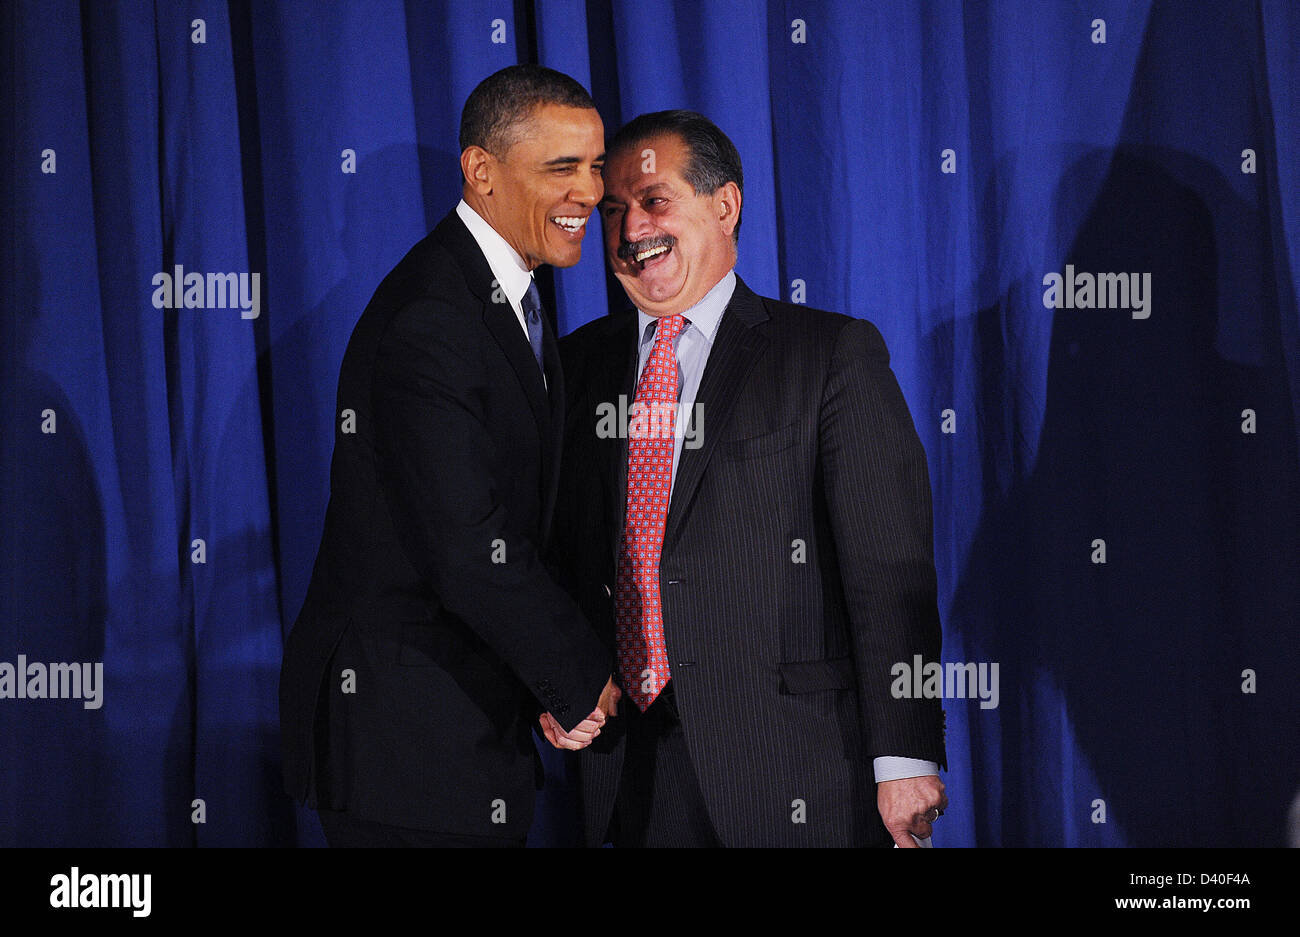 Washington DC, USA. 27th February 2013. United States President Barack Obama is greet by Andrew Liveris, President, Chairman, and Chief Executive Officer of The Dow Chemical Company at the Business Council dinner February 27, 2013 at the Park Hyatt Hotel in Washington, DC..Credit: Olivier Douliery / Pool via CNP/Alamy Live News Stock Photo